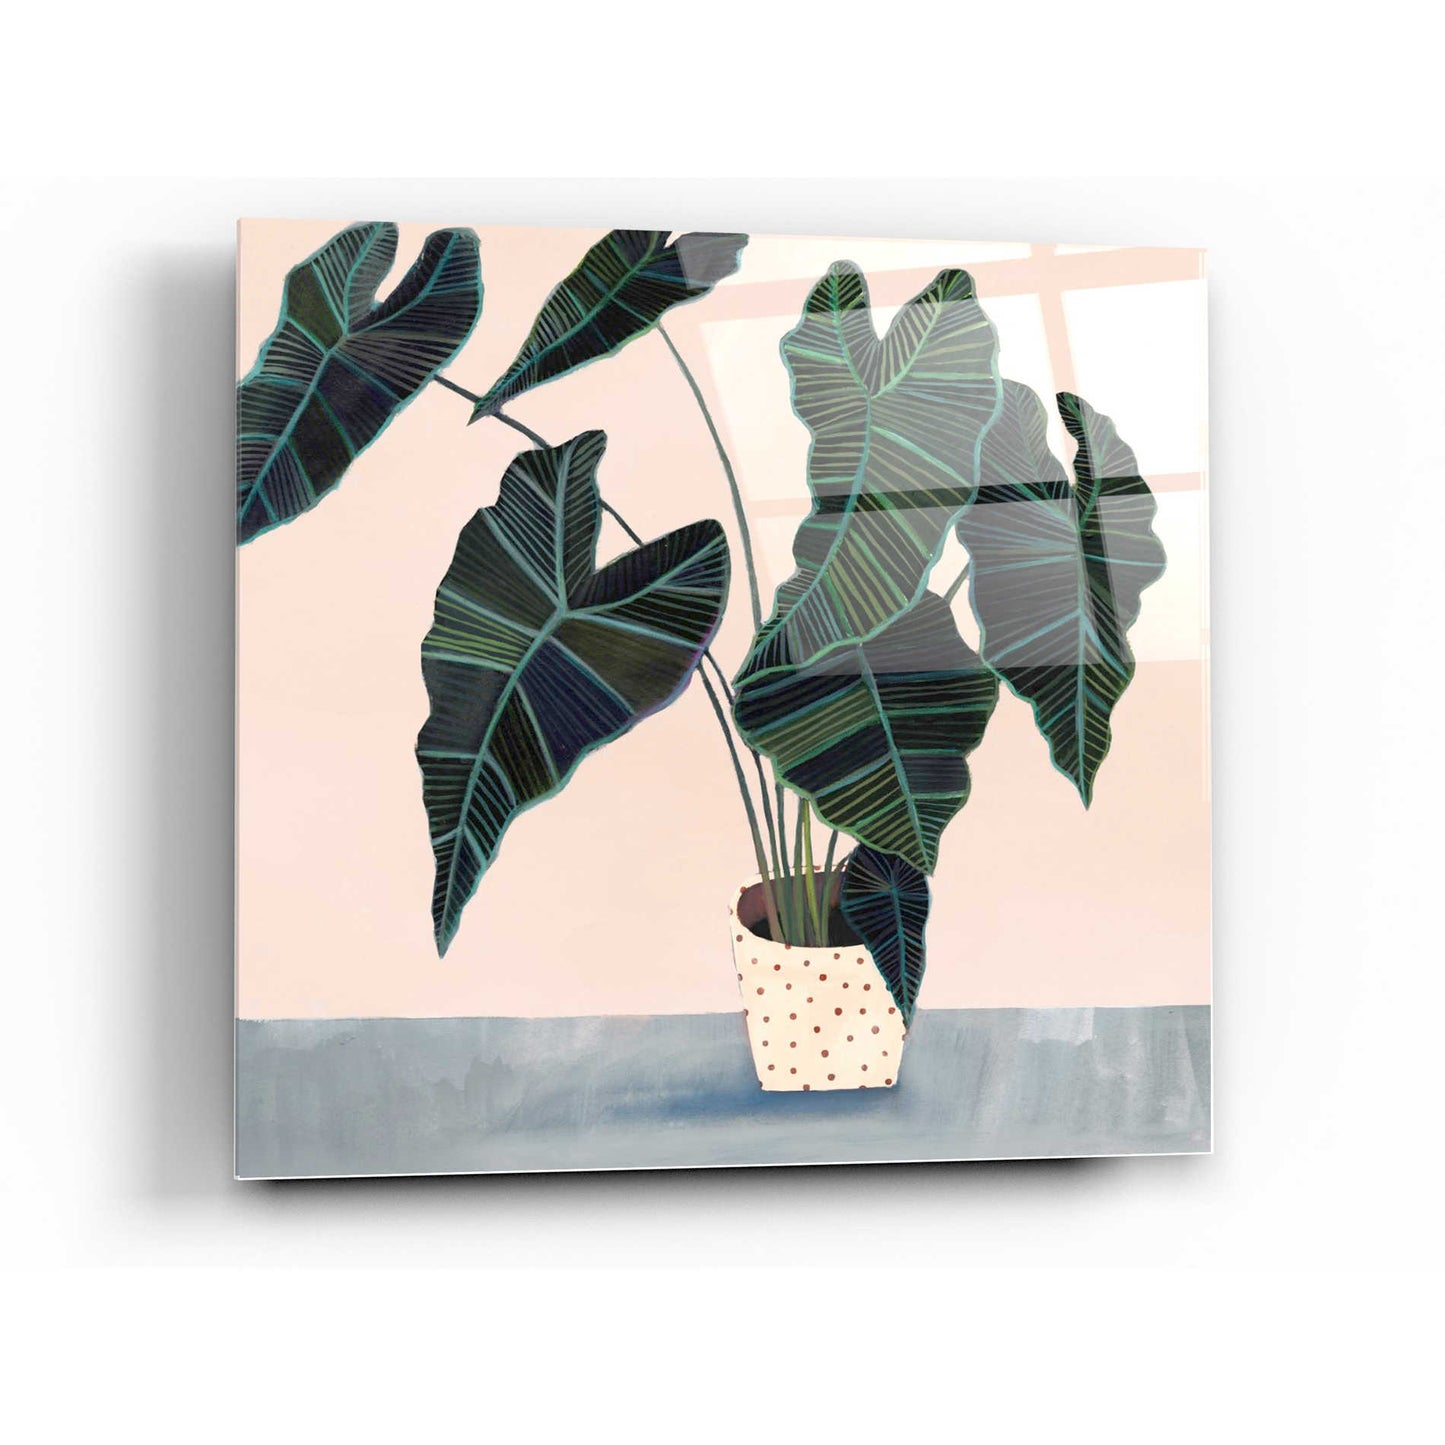 Epic Art 'Houseplant II' by Victoria Borges Acrylic Glass Wall Art,24x24